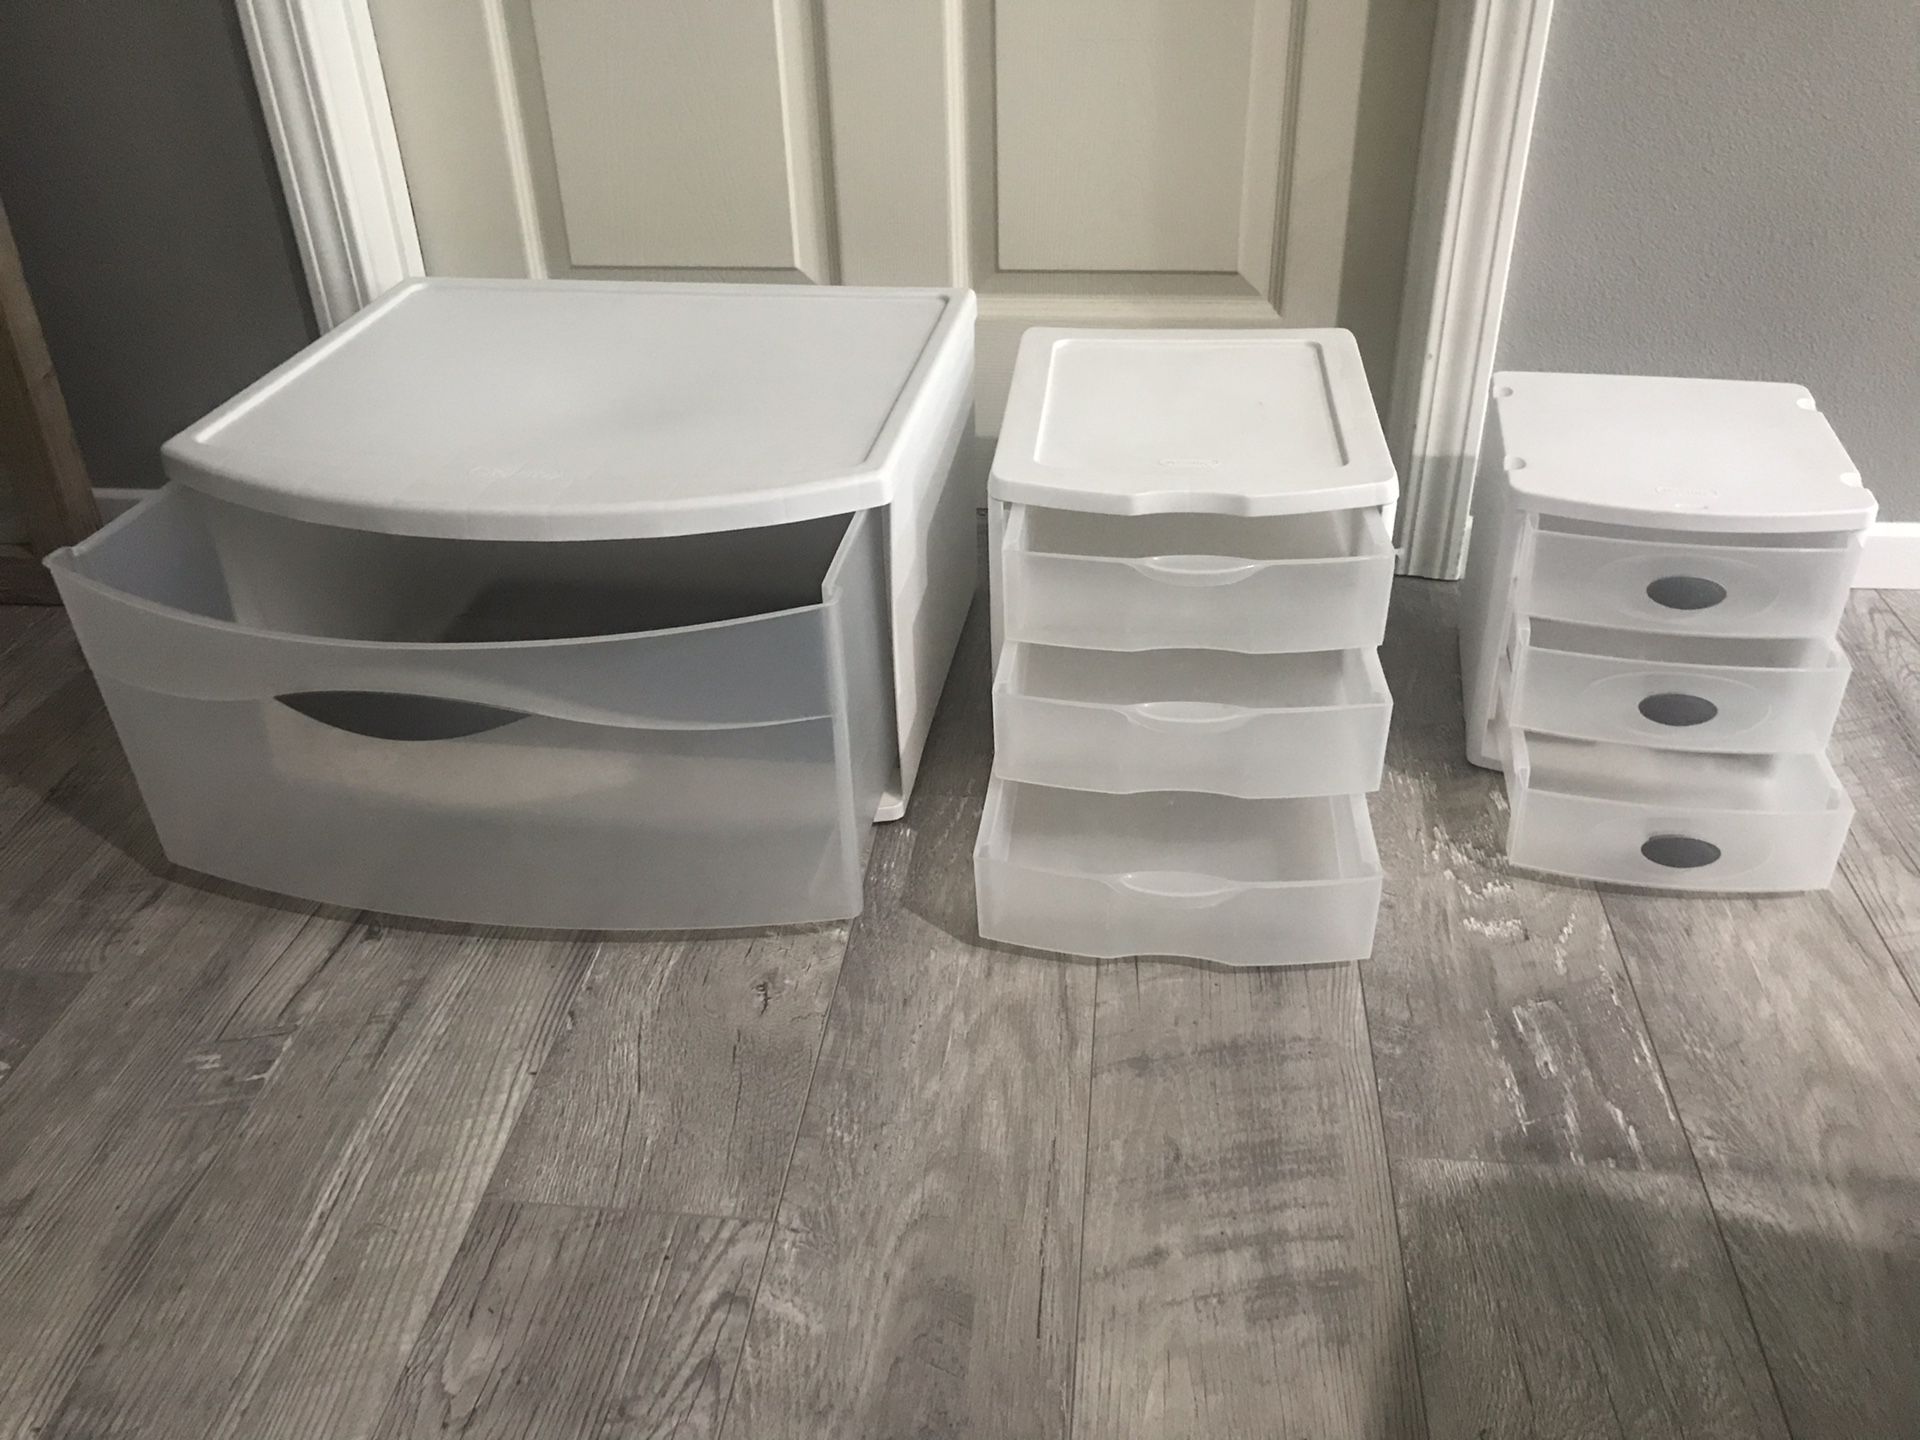 Plastic storage containers (with drawers)